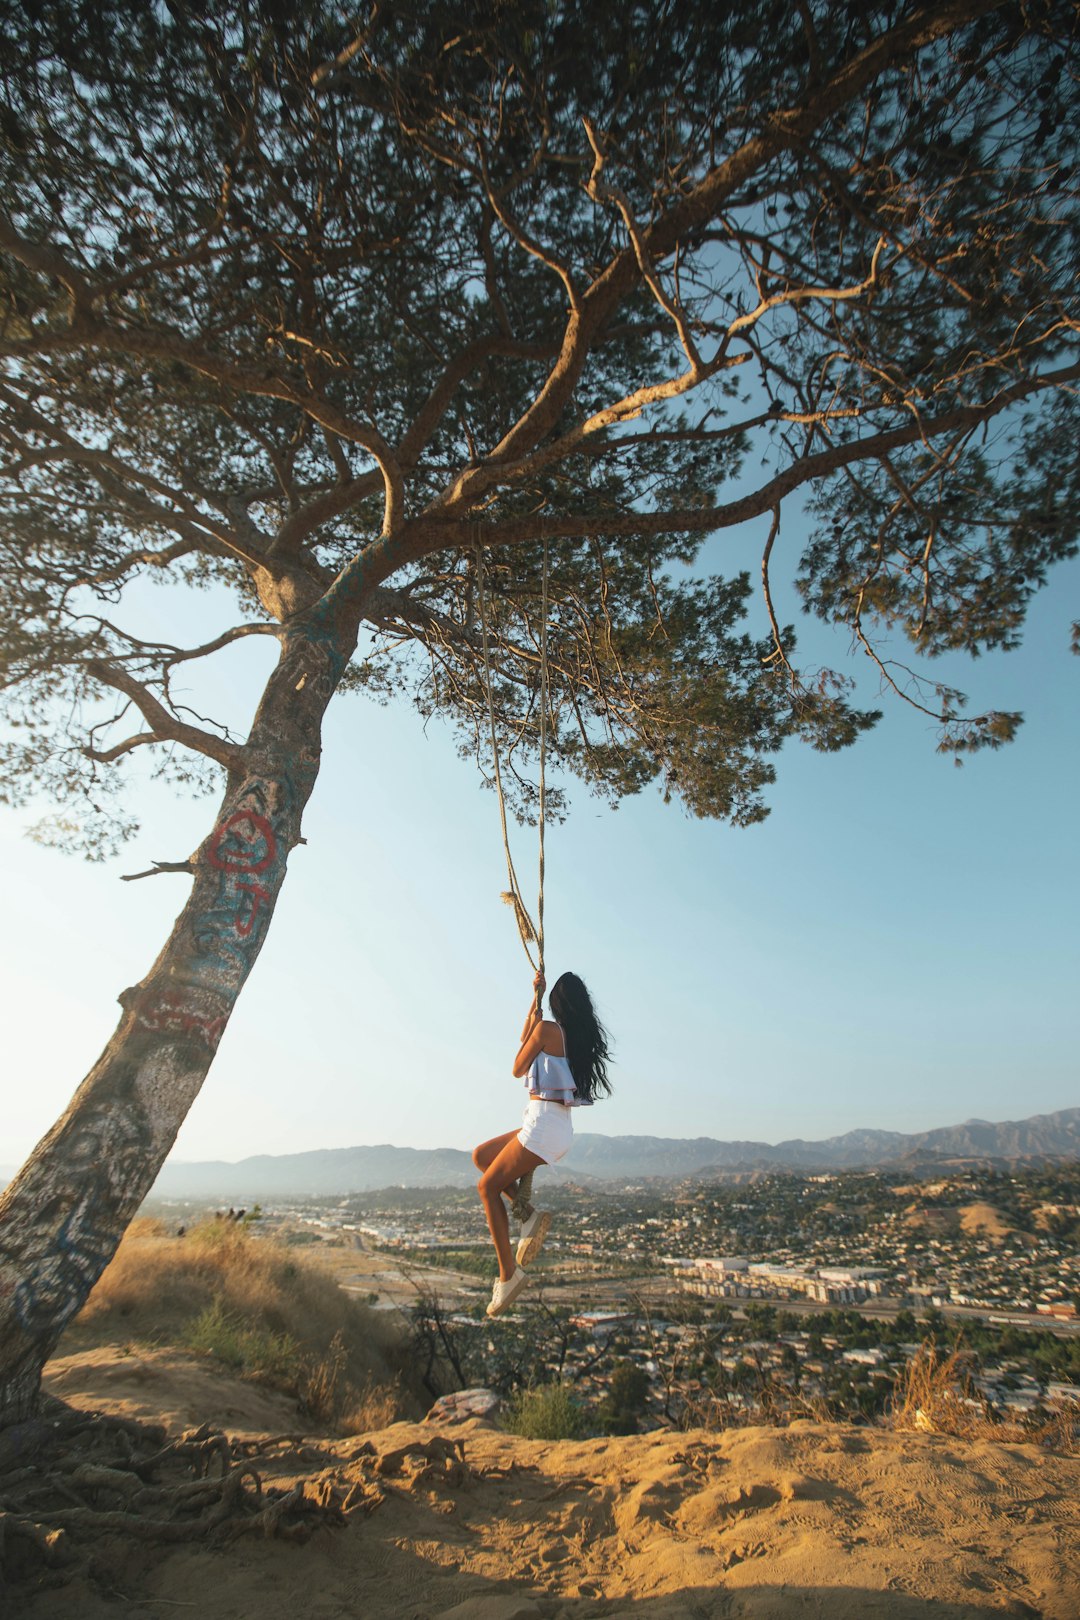 Secret Swing Angels Point - From Elysian Park, United States